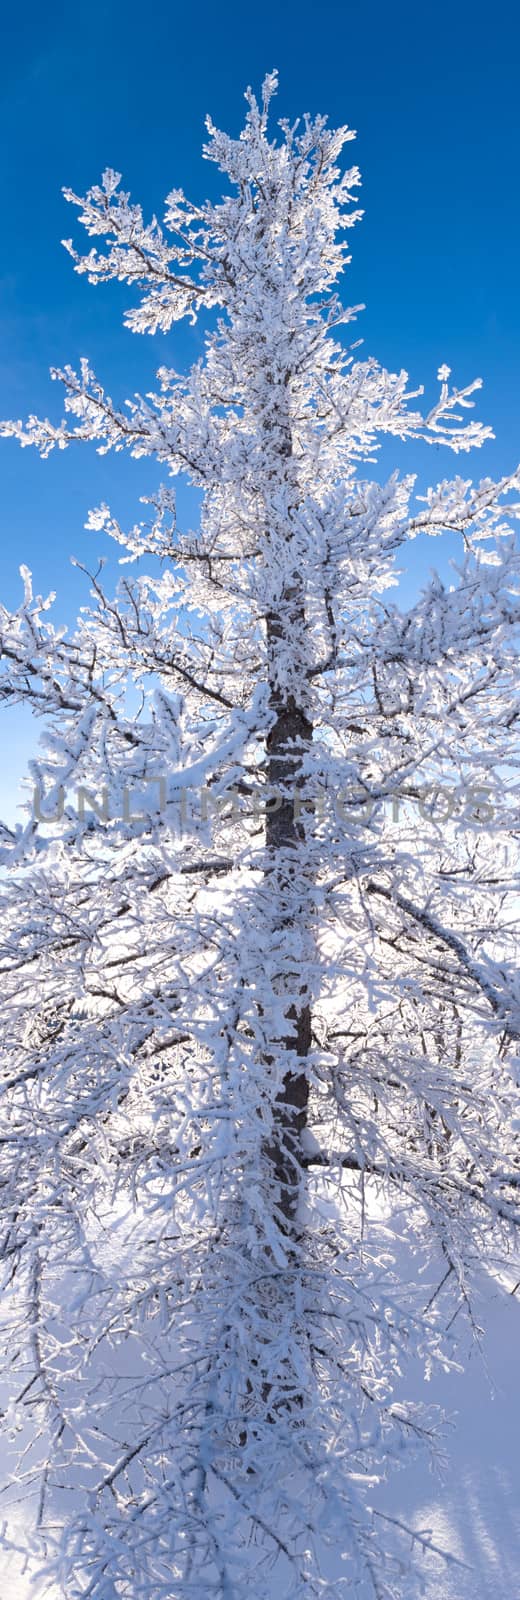 Winter taiga black spruce tree hoar frost covered by PiLens